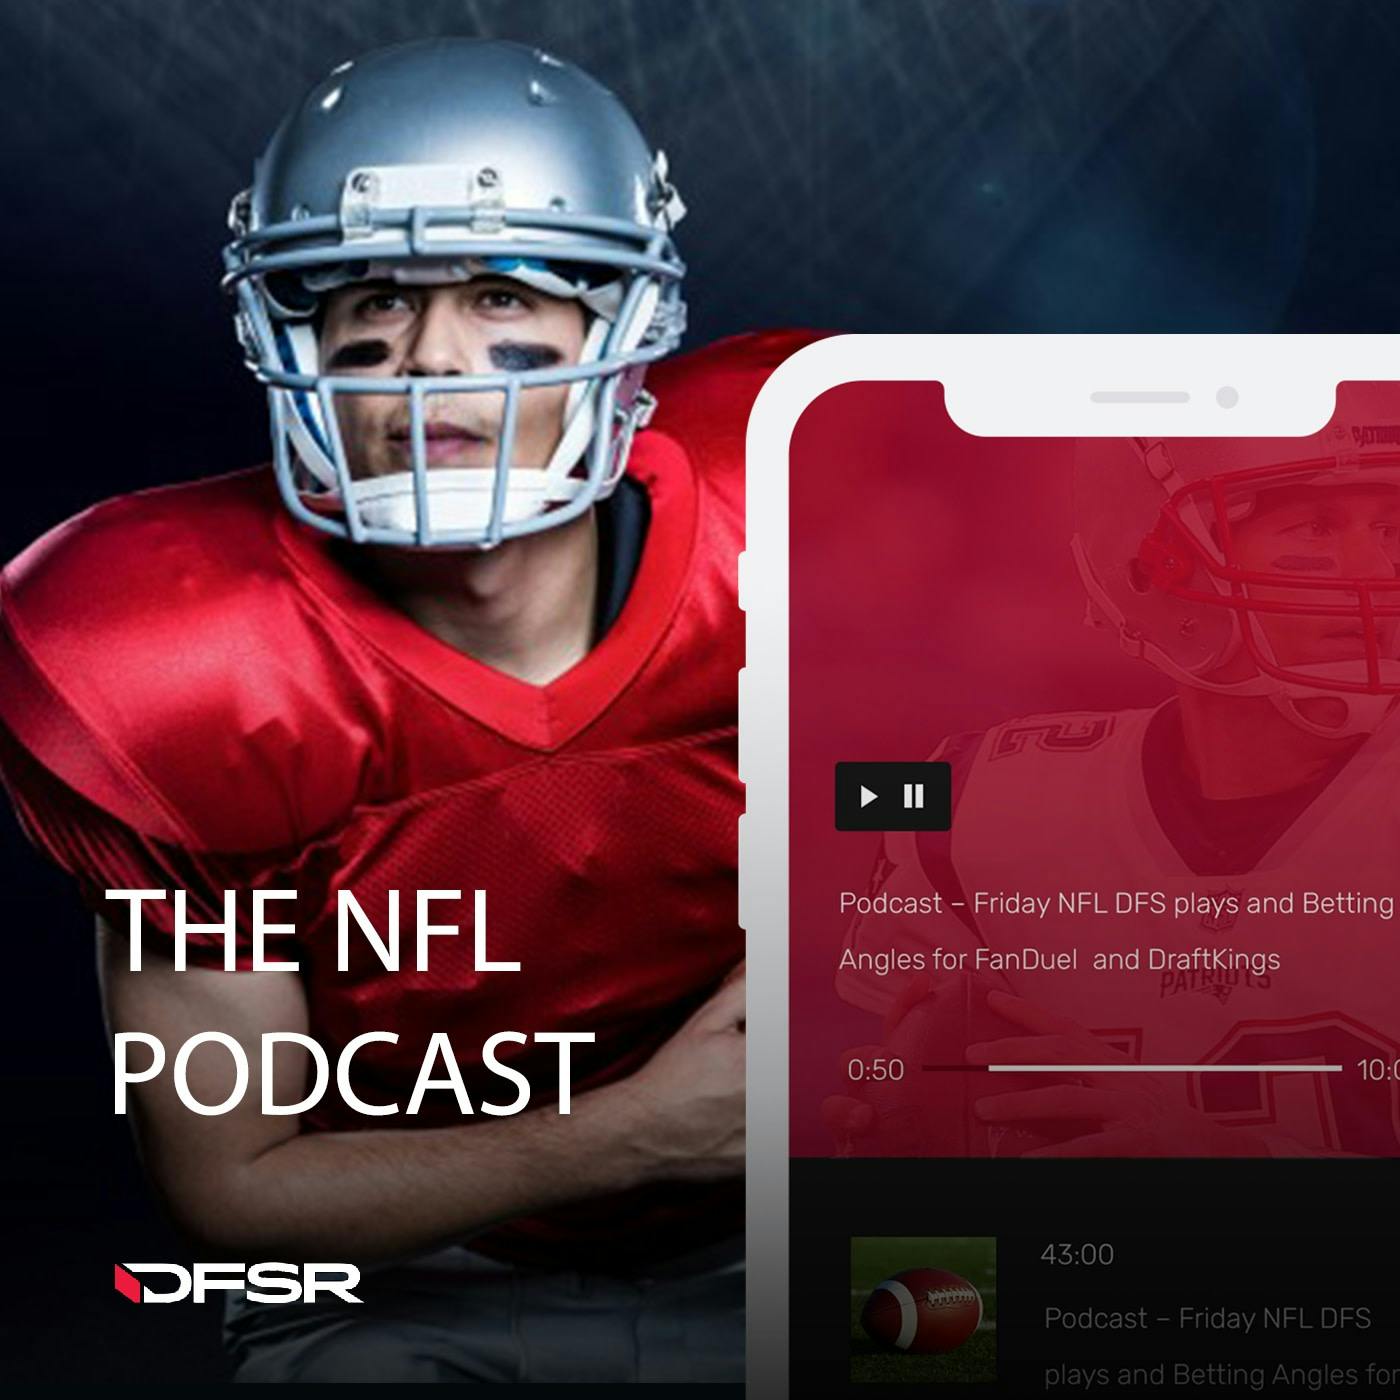 DFS NFL Podcast Week 8 Recap and Week 9 Preview for FanDuel and DraftKings